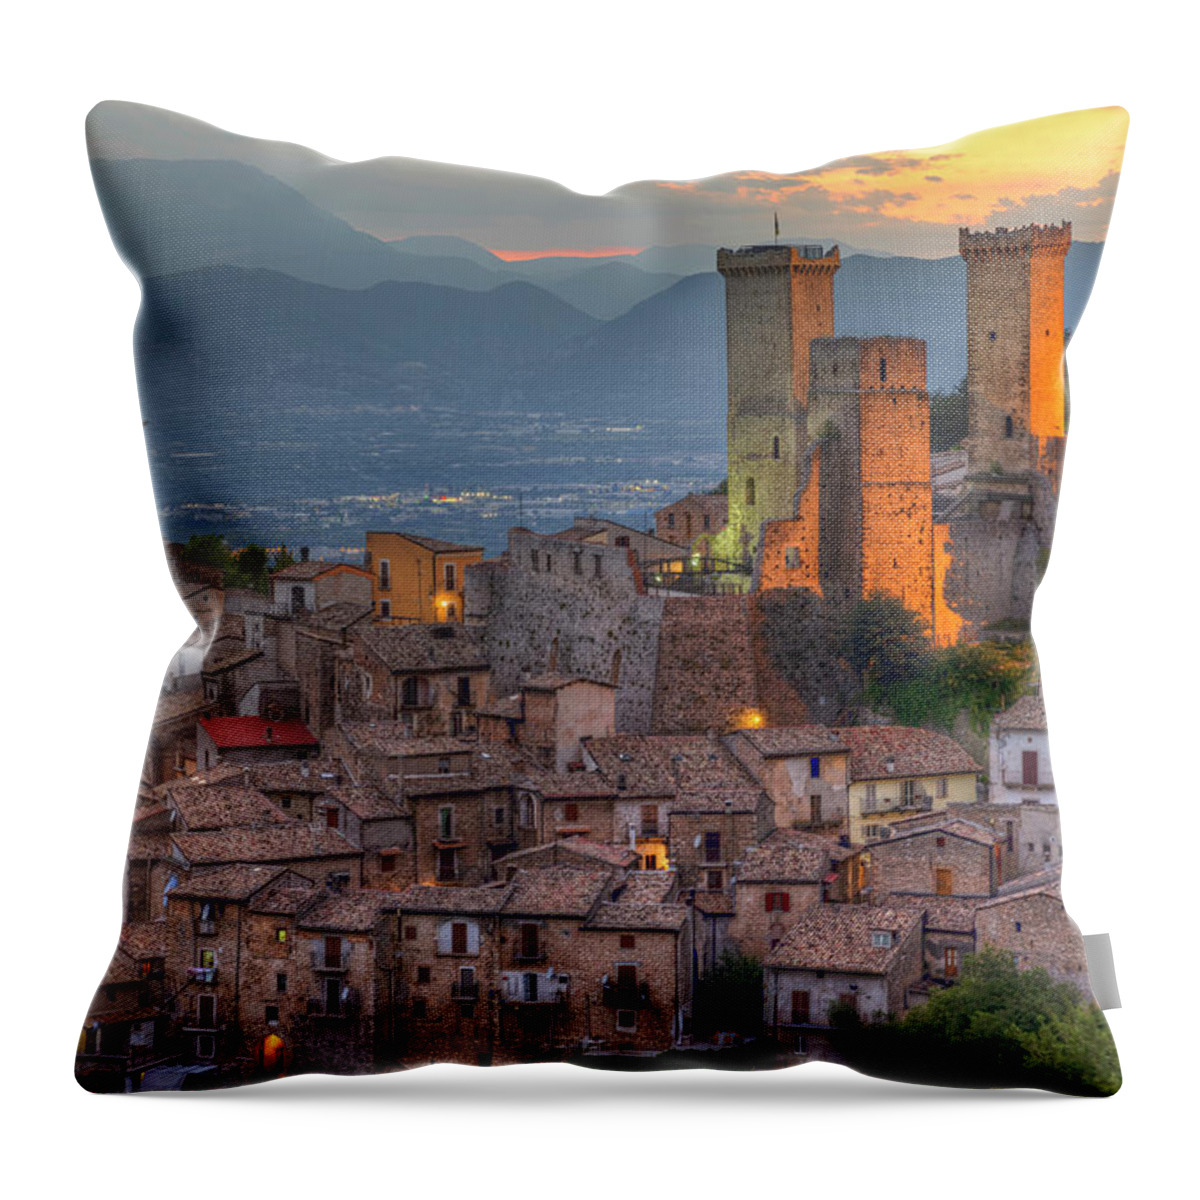 Pacentro Throw Pillow featuring the photograph Pacentro - Abruzzo - Italy #3 by Joana Kruse